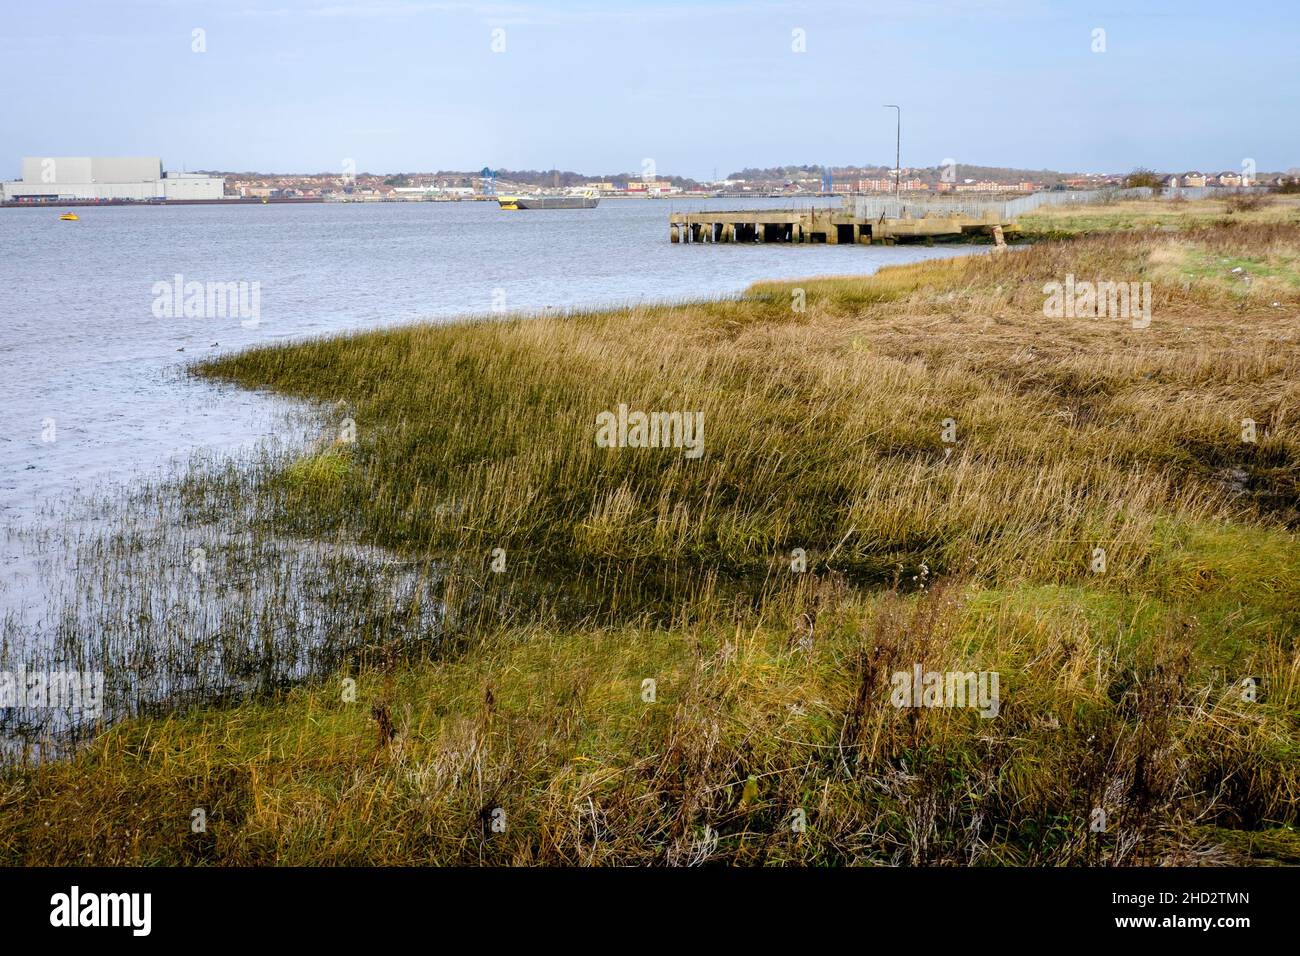 Swanscombe Peninsula on the Thames estuary in Kent, designated a Site of Special Scientific Interest in November 2021. Stock Photo